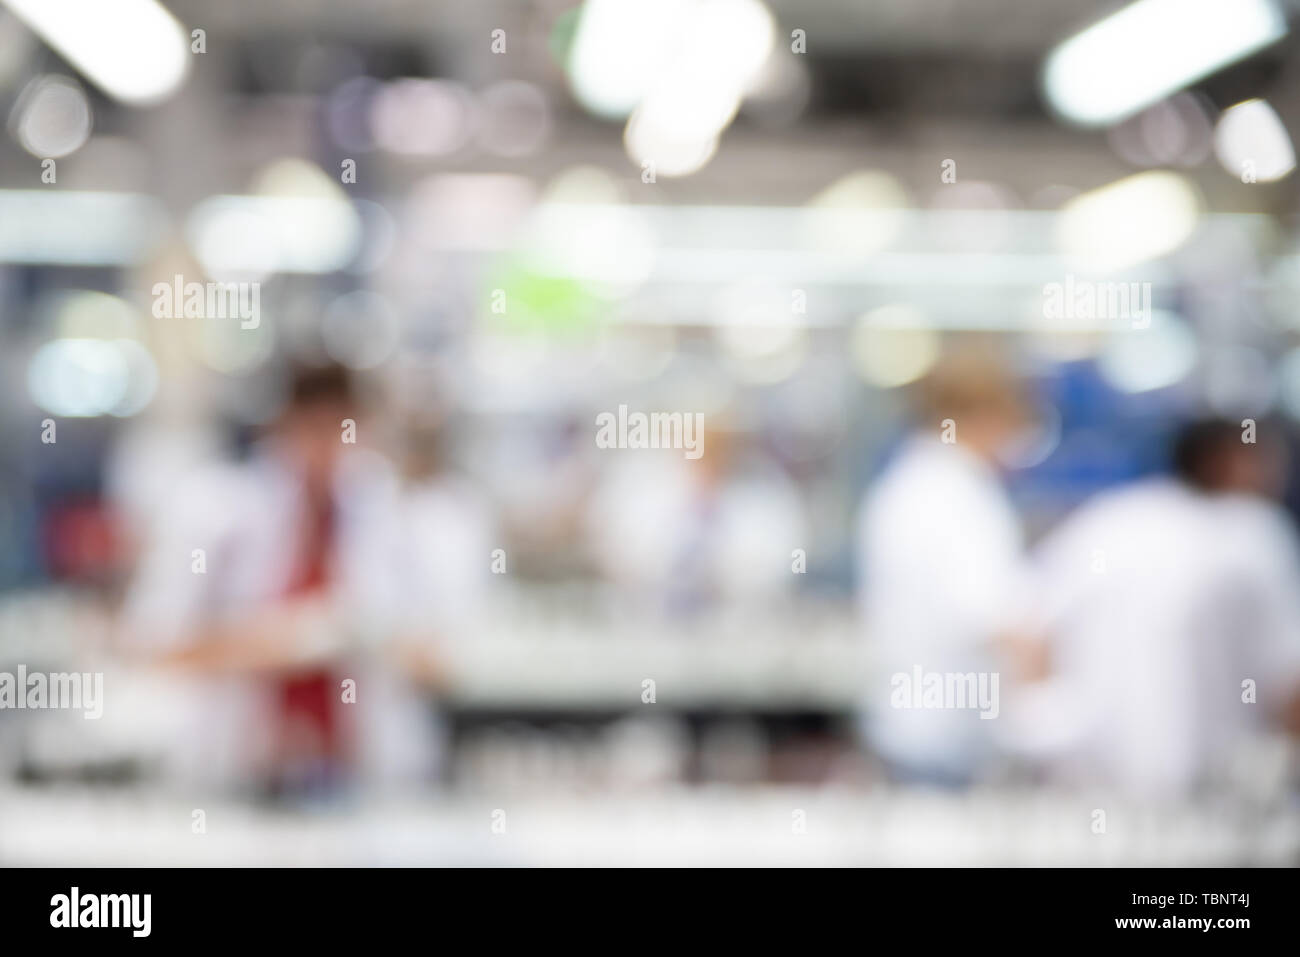 Abstract blurred industry background, workers on production line, blur technique. Stock Photo